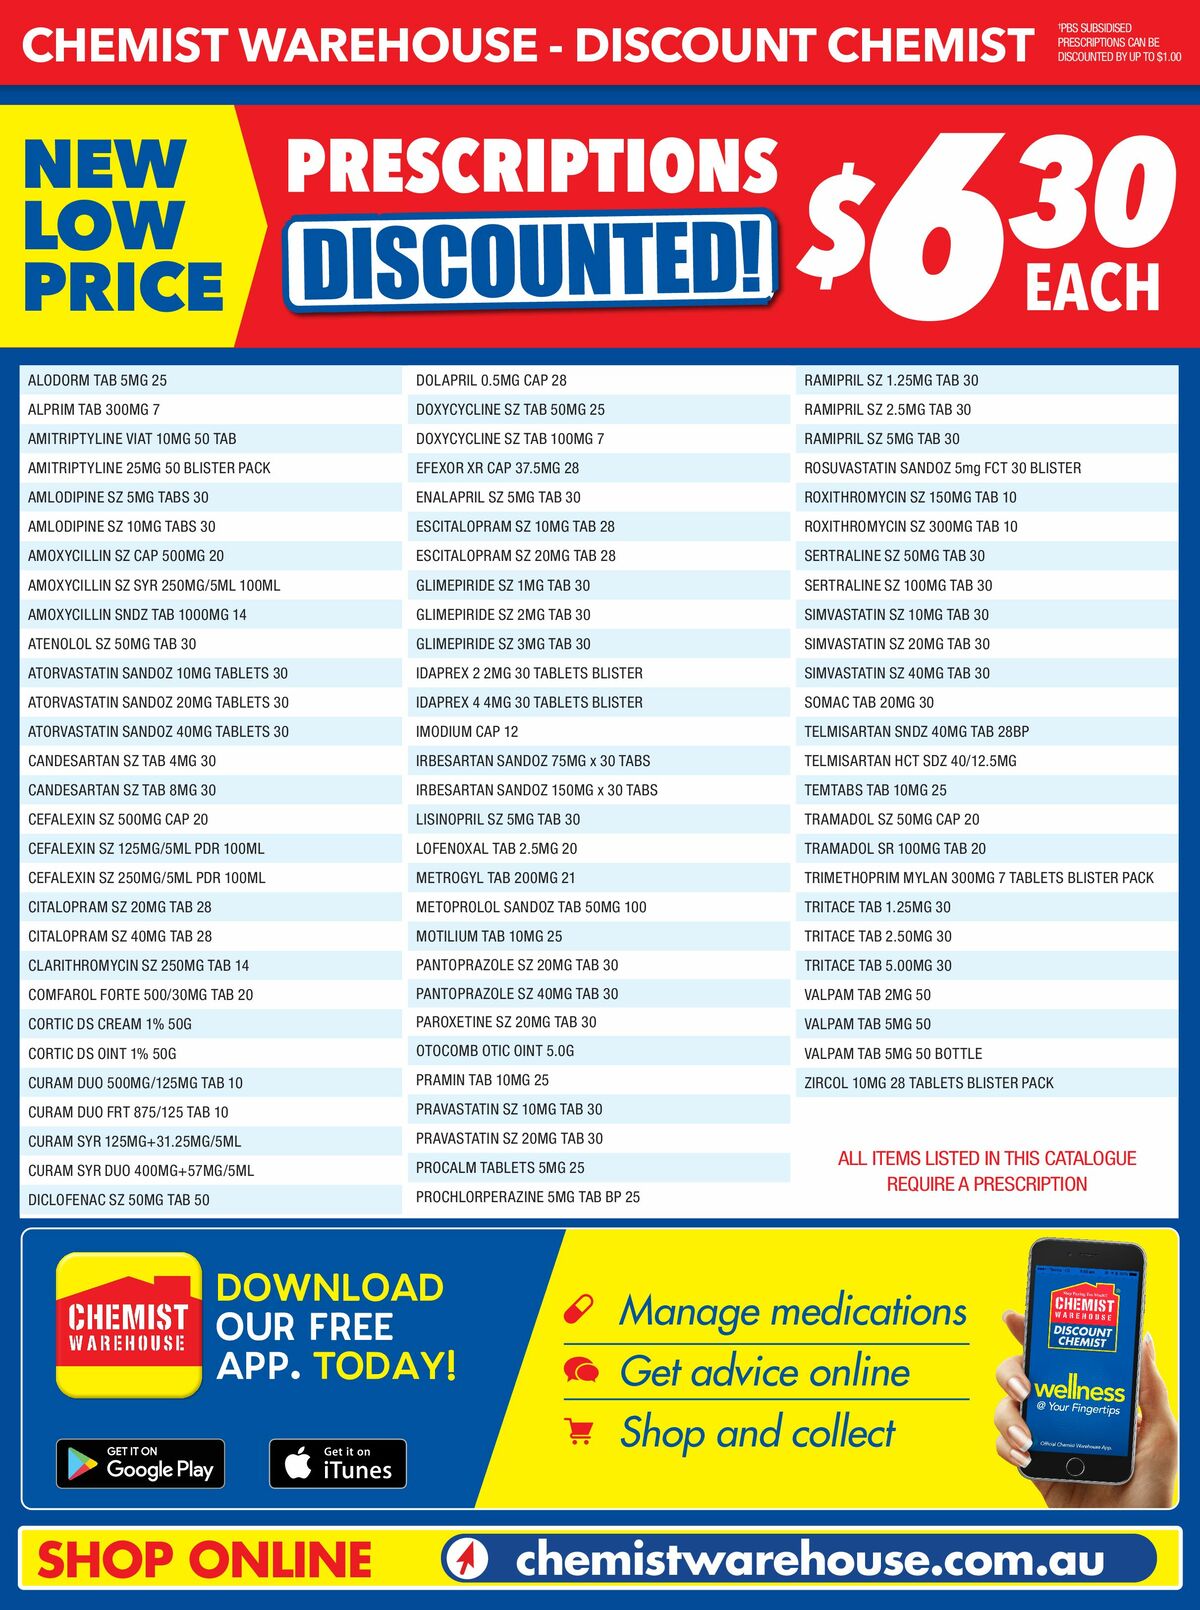 Chemist Warehouse Discounted! Prescriptions Catalogues from 2 August